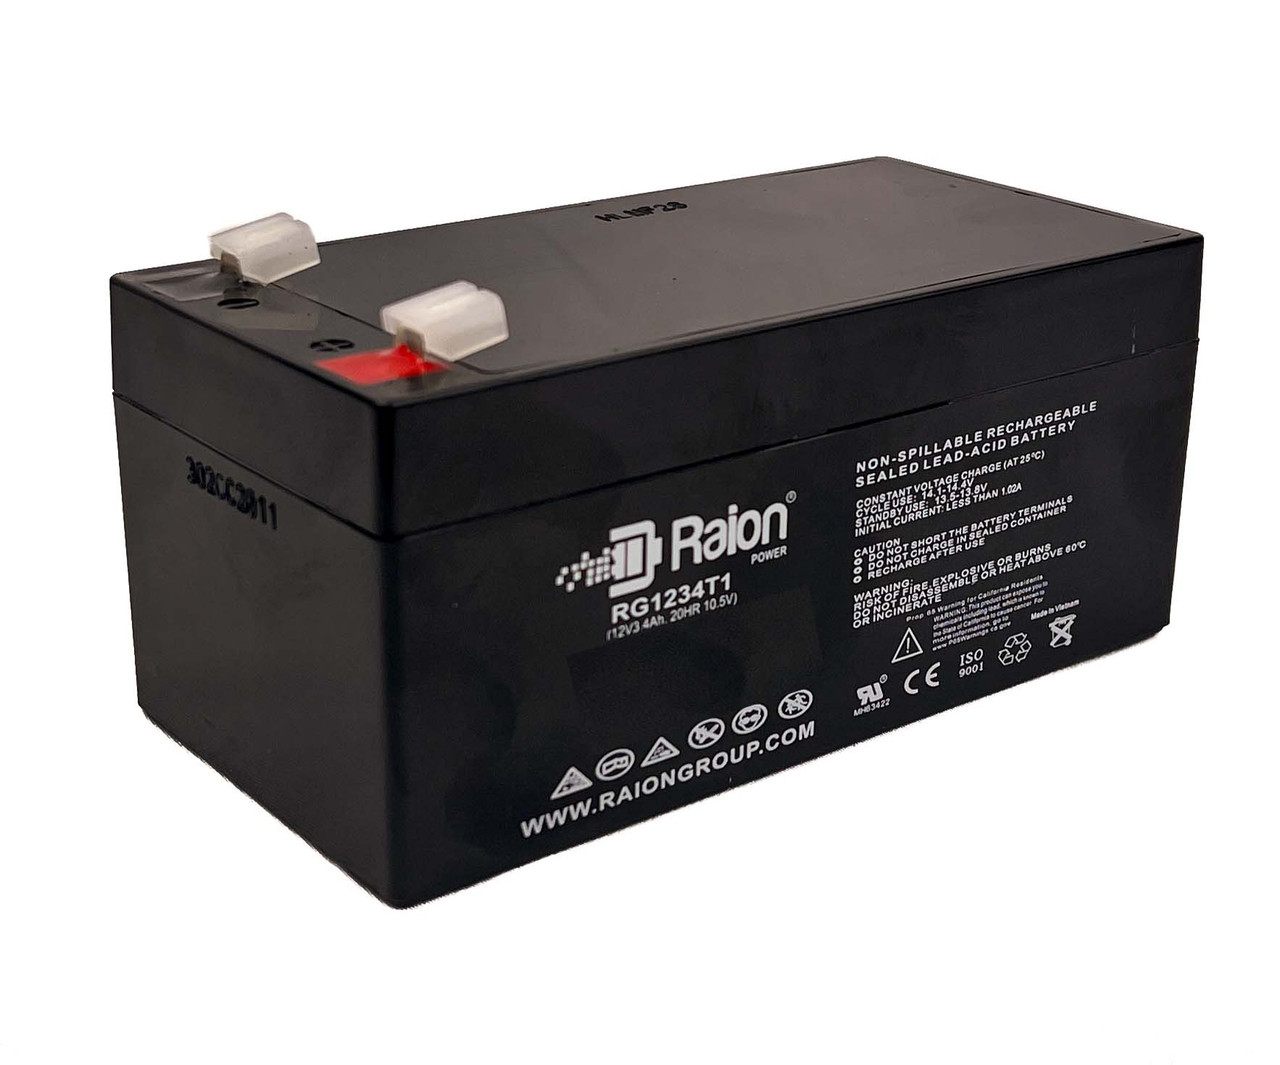 Raion Power 12V 3.4Ah Non-Spillable Replacement Battery for Park Medical Electronics Lab 1051 Mini Lab